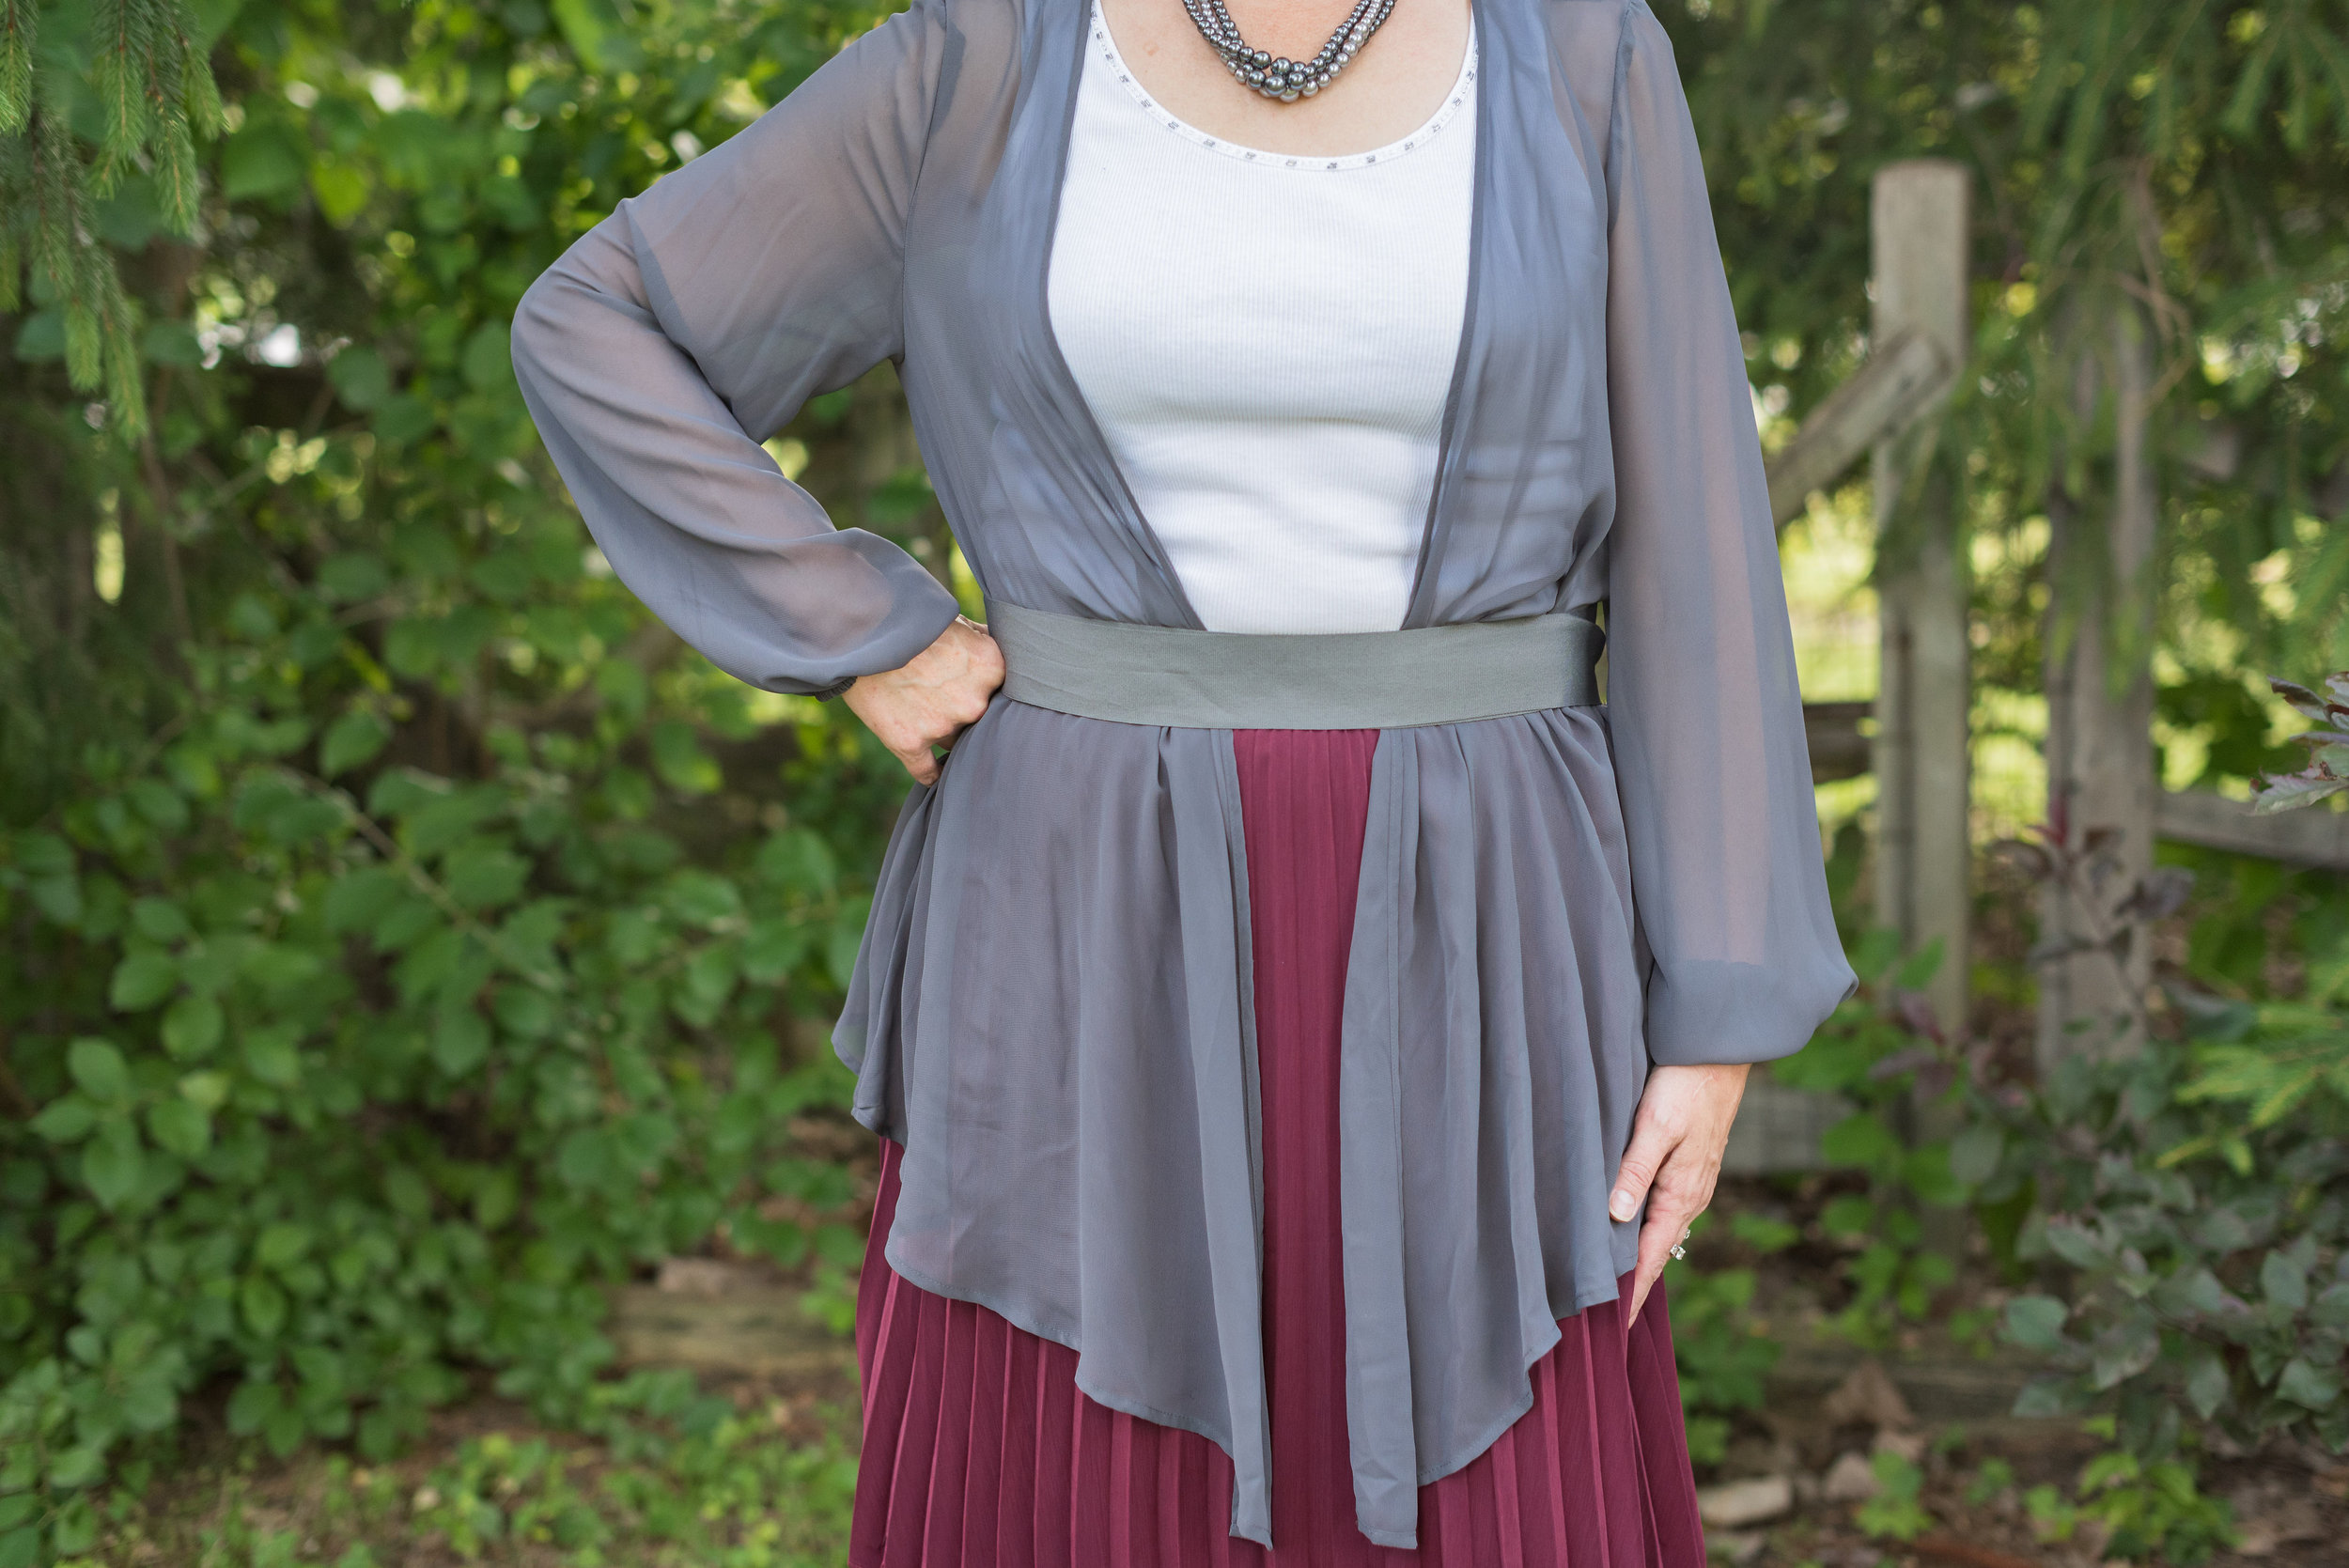 gray-maroon-outfit-15.jpg